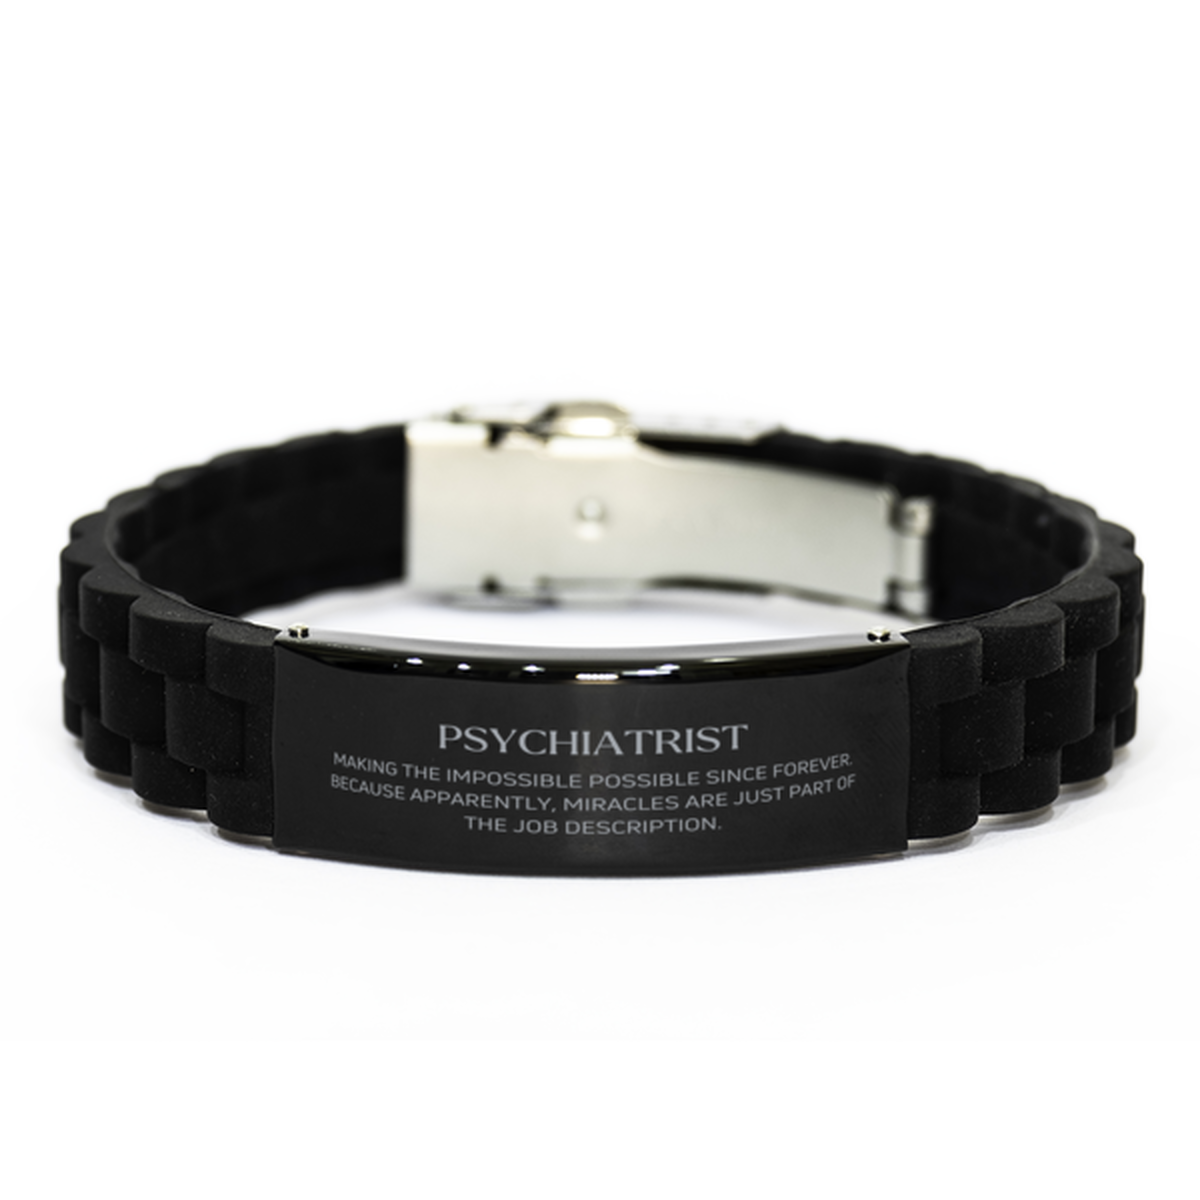 Funny Psychiatrist Gifts, Miracles are just part of the job description, Inspirational Birthday Black Glidelock Clasp Bracelet For Psychiatrist, Men, Women, Coworkers, Friends, Boss